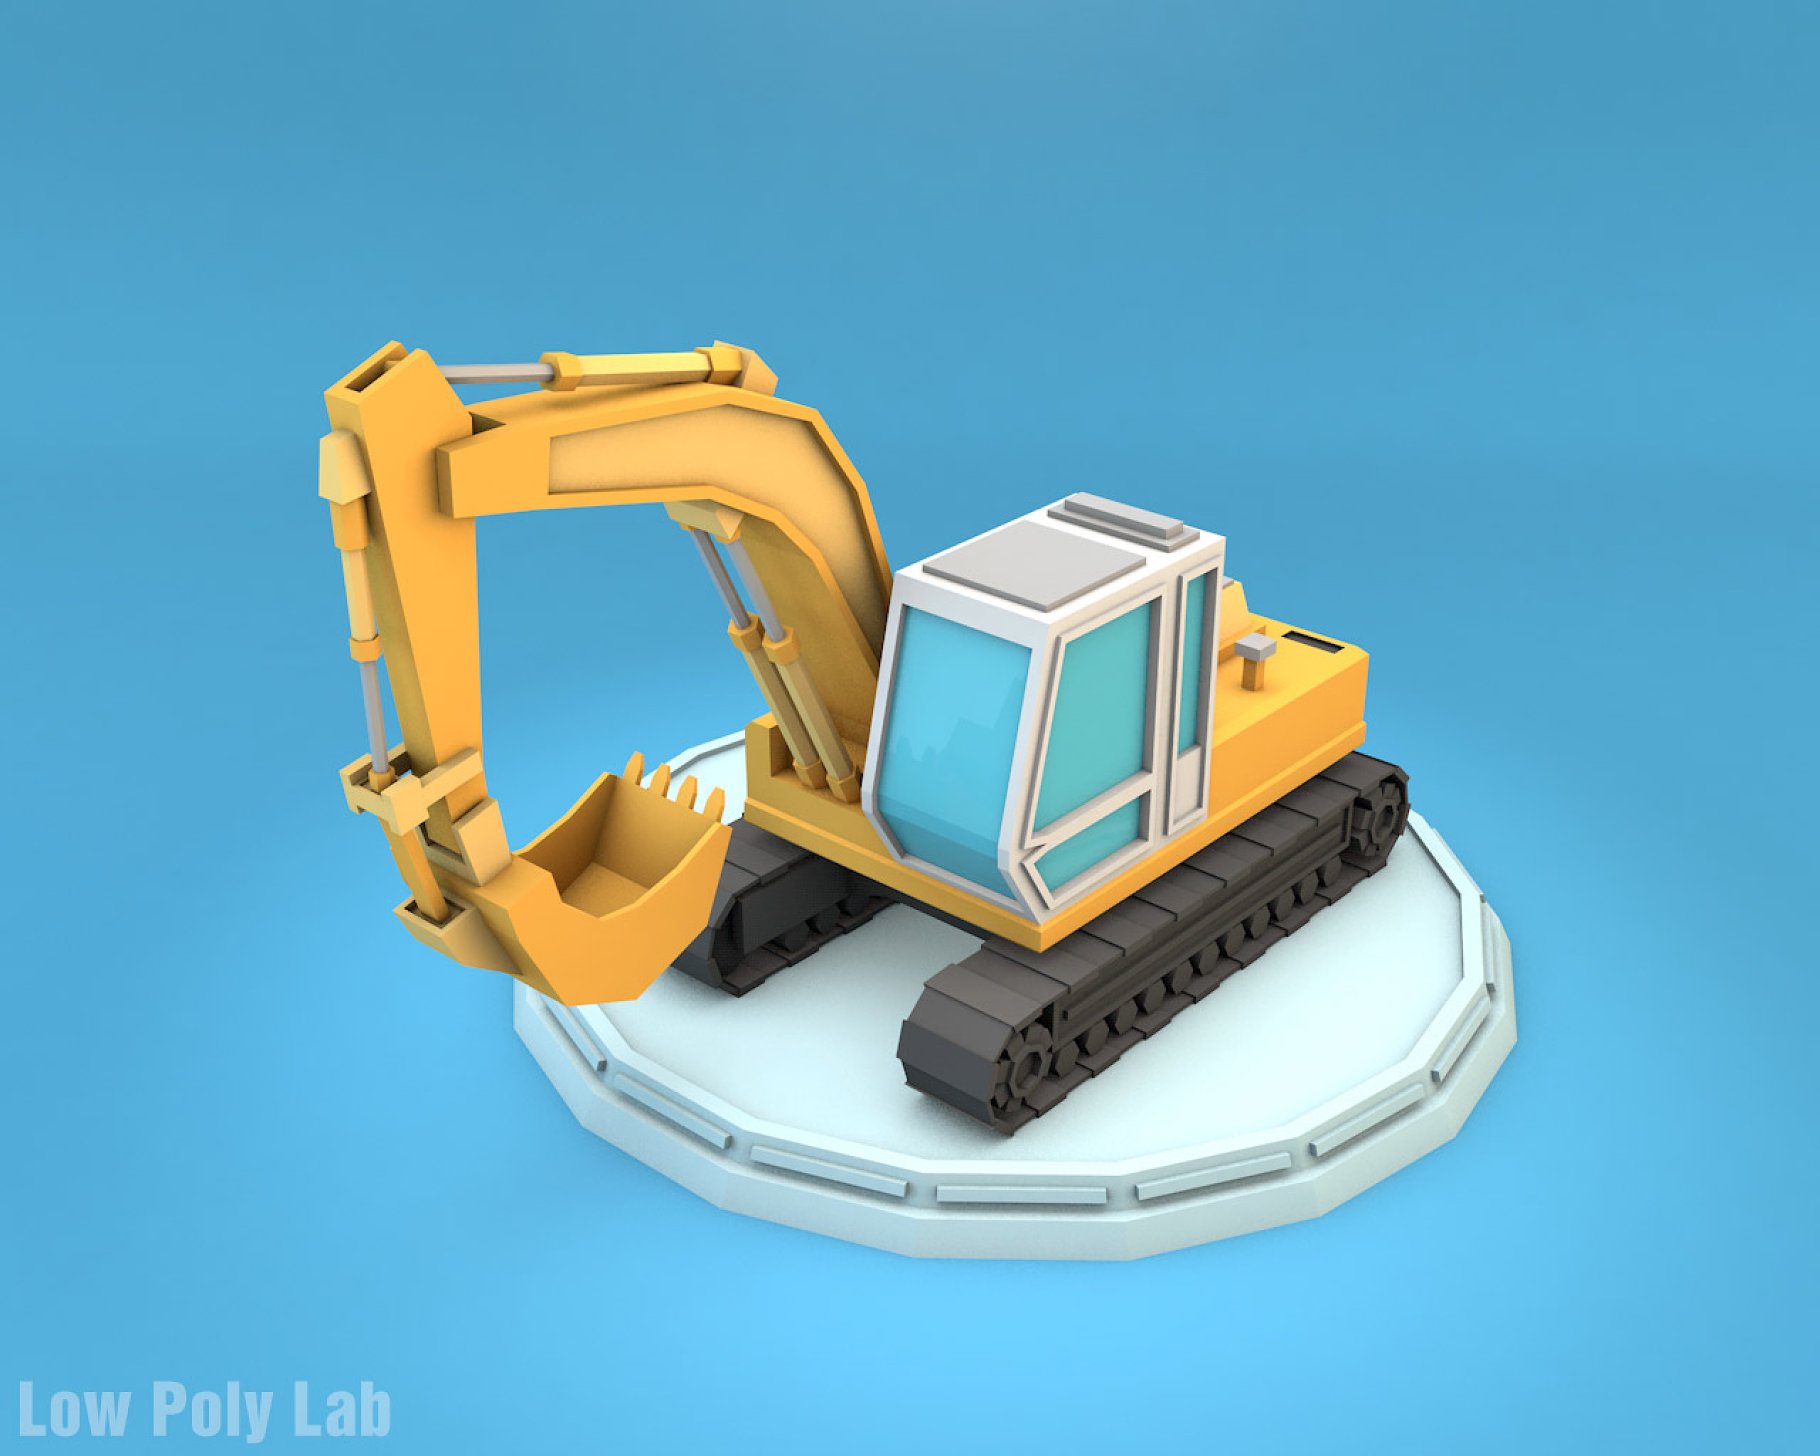 Front mockup of low poly excavator on a blue background.